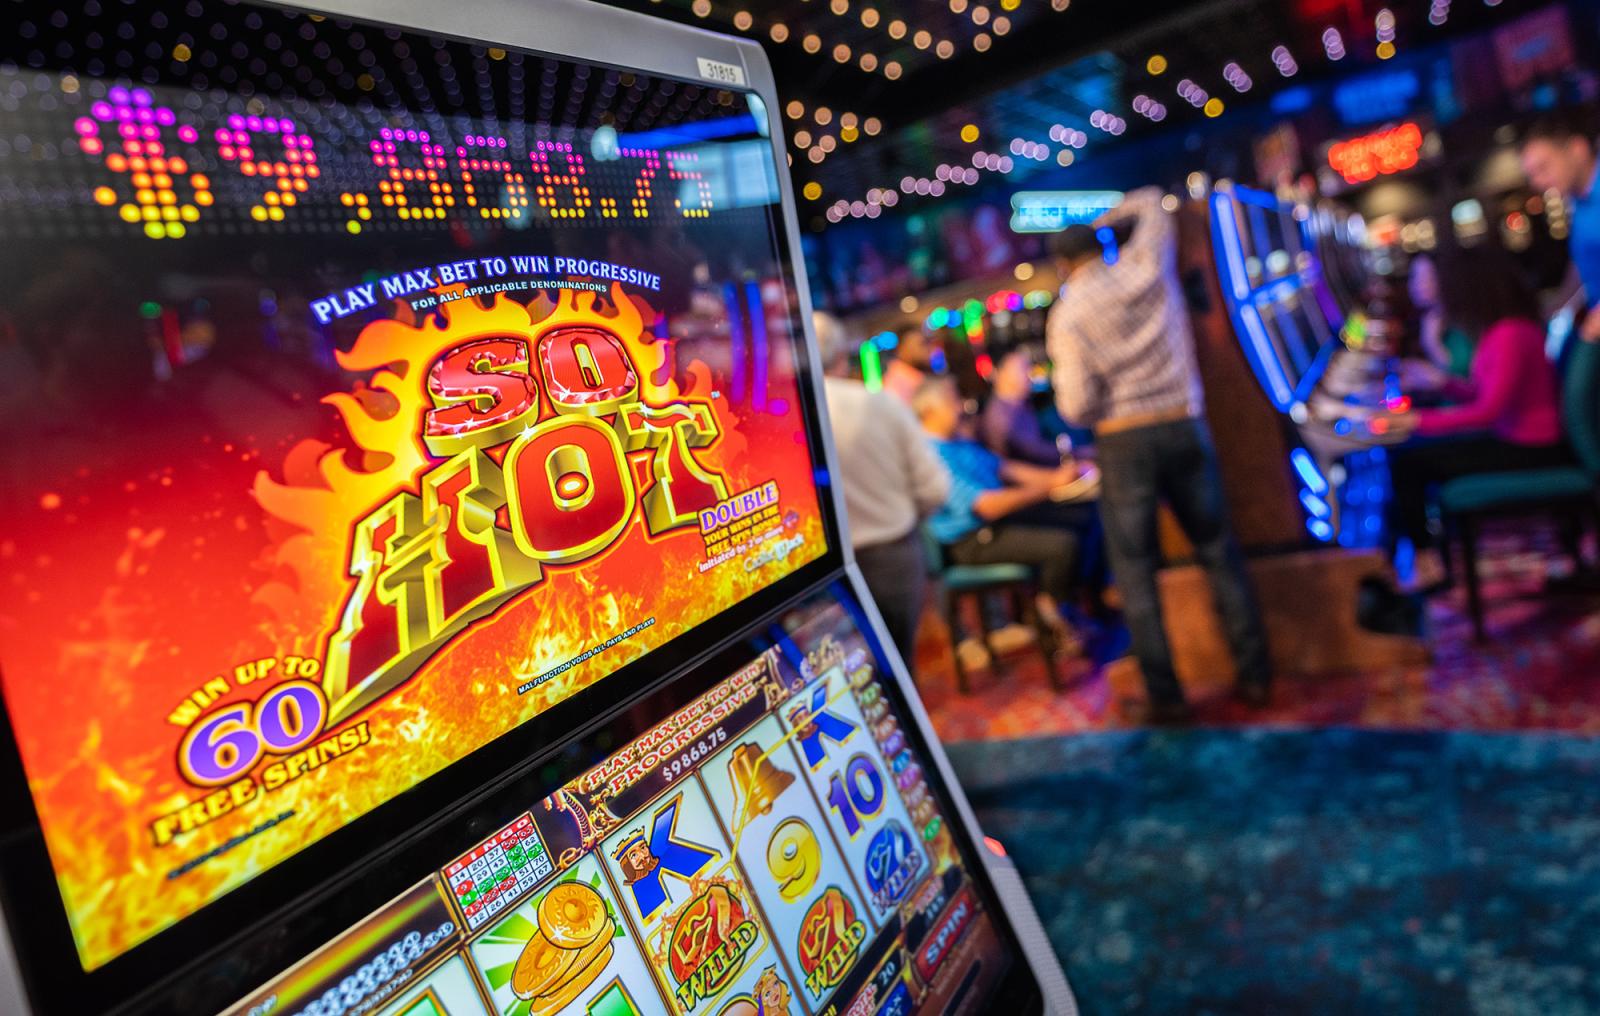 Close up on a casino game called So Hot with a $9,800 jackpot